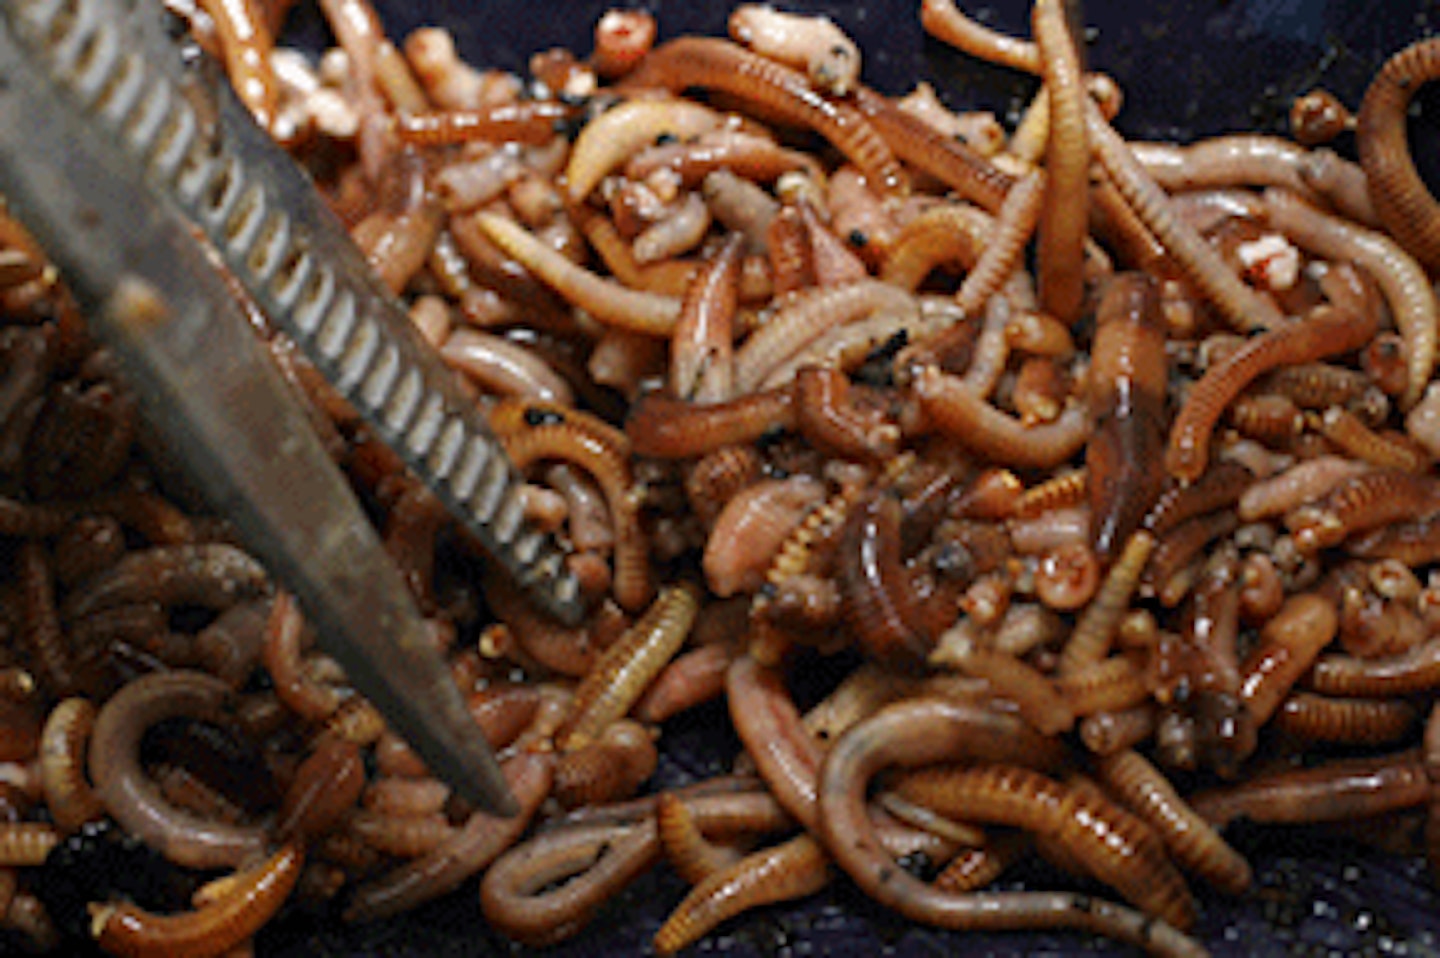 LOBWORMS, REDWORMS AND DENDROBAENA WORMS